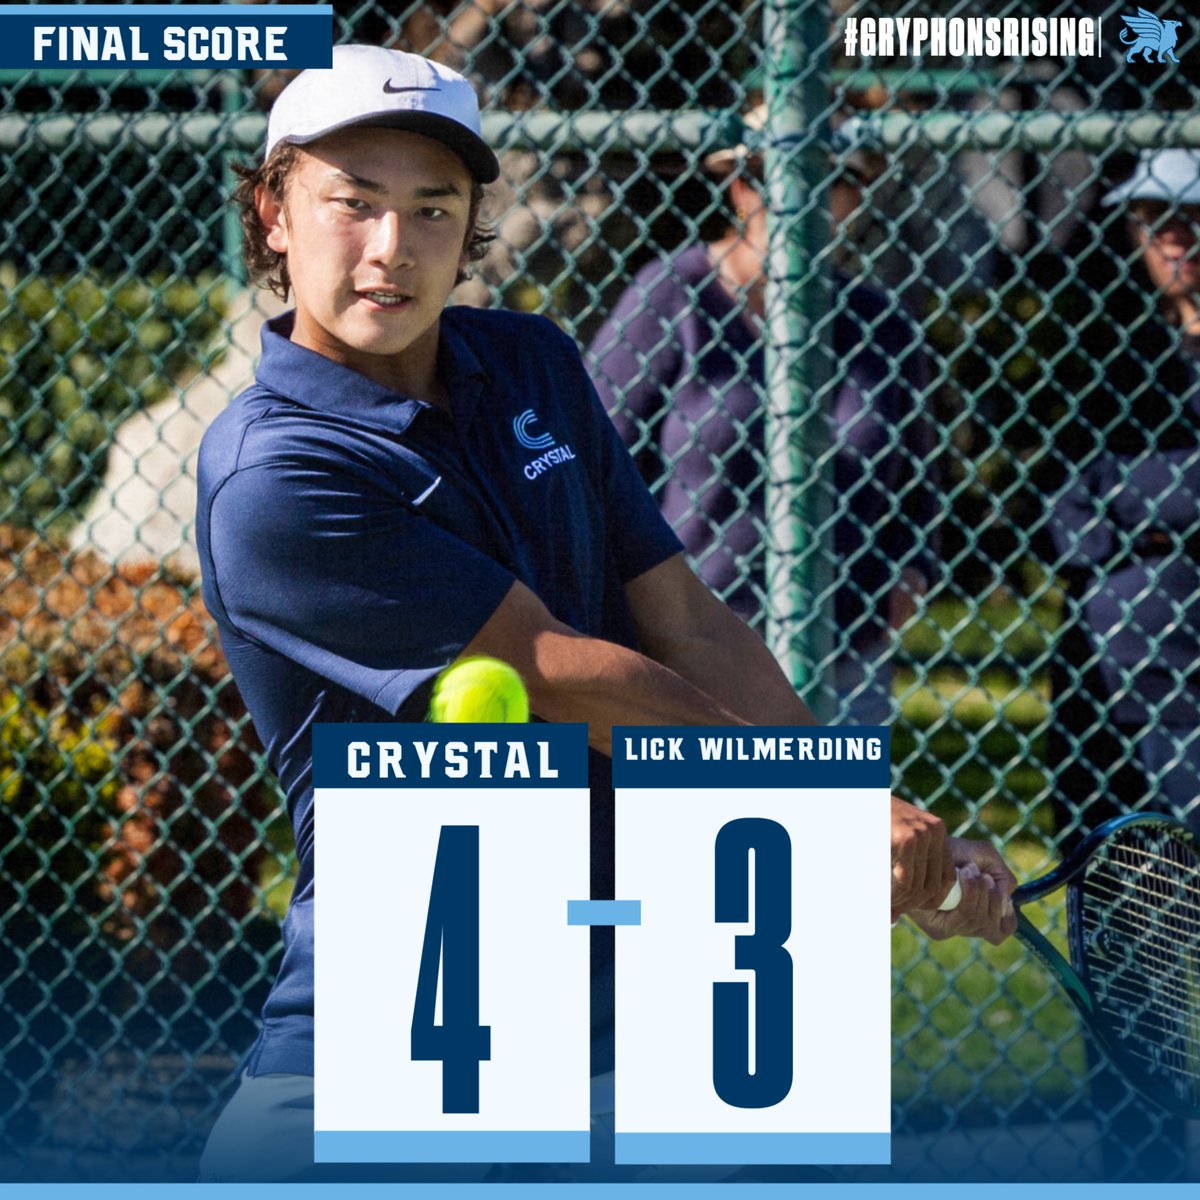 Crystal traveled to Lick Wilmerding and won 4-3 yesterday! #GryphonsRising